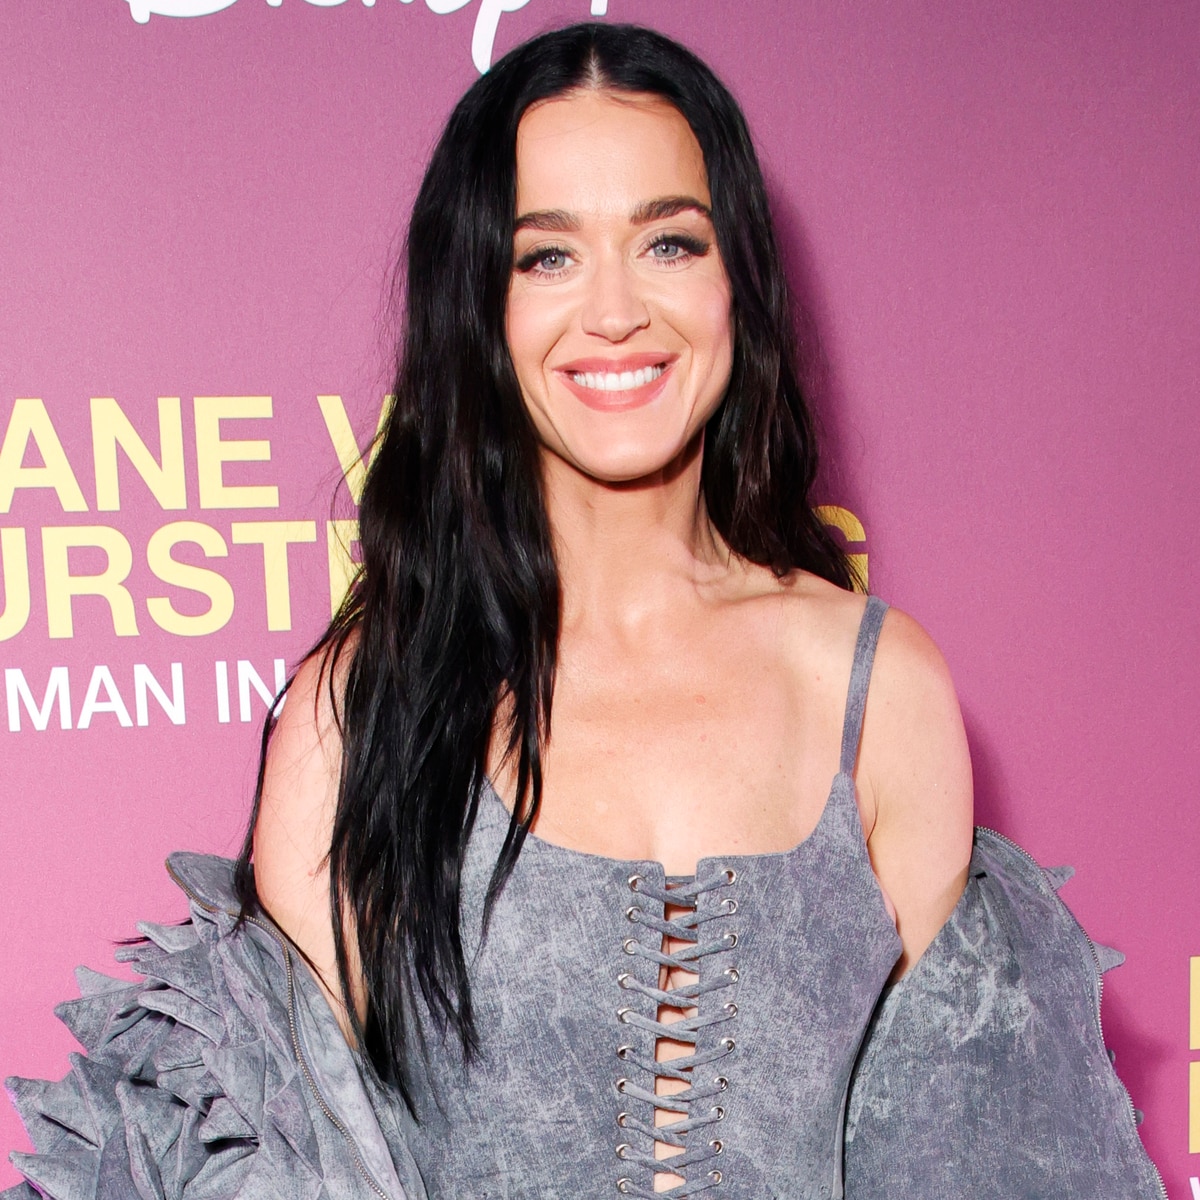 Katy Perry Covers Her C-Section Scar Wearing Her Most Revealing Look